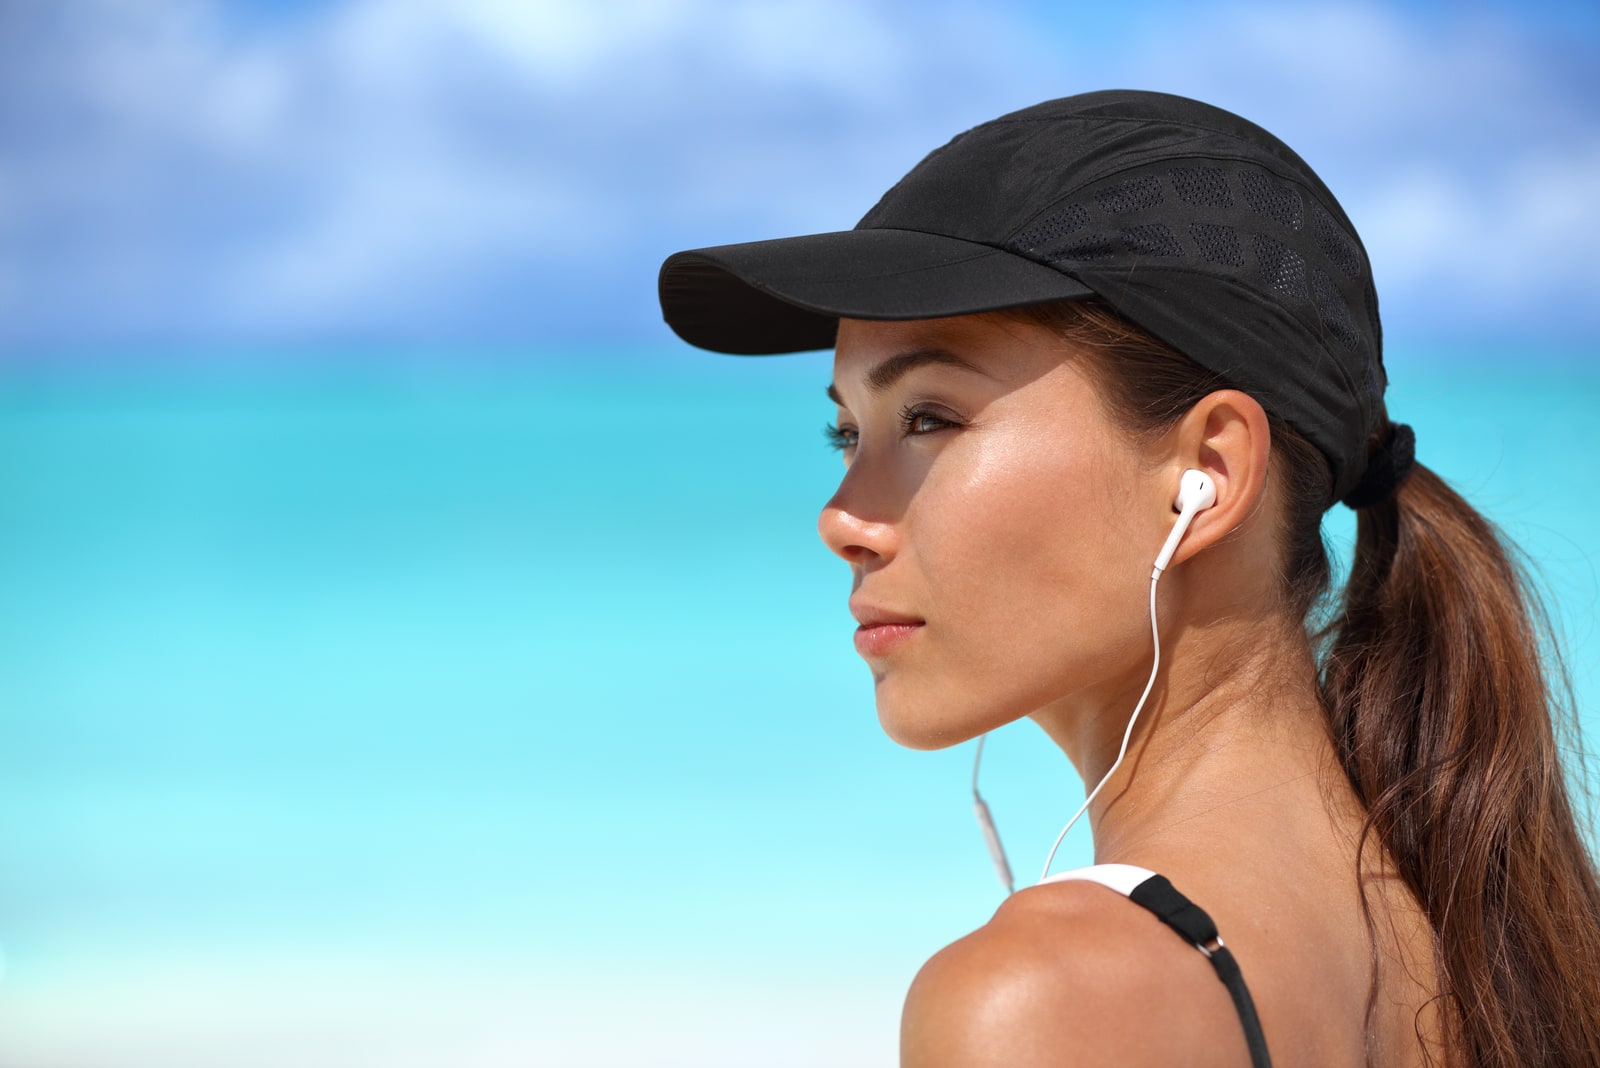 a portrait of a woman with a cap and headphones in her ears